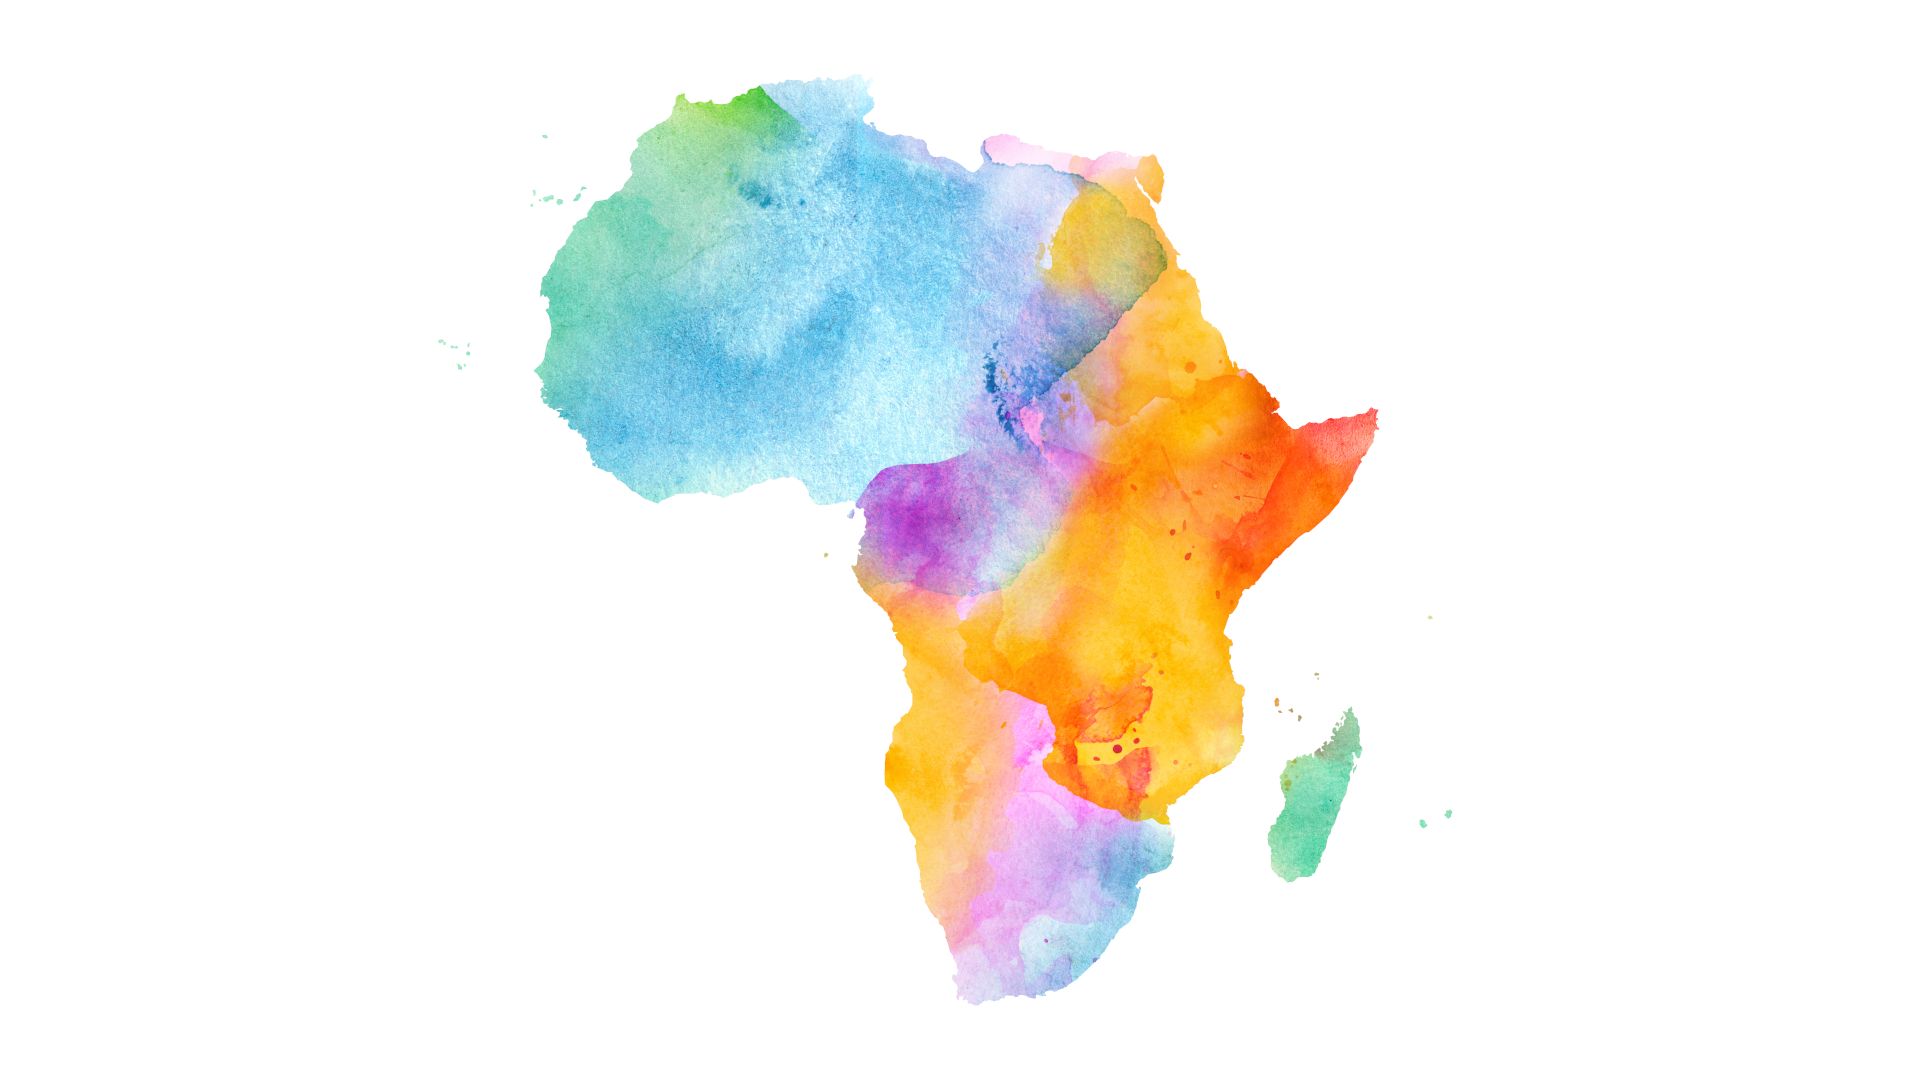 Africa’s Complexities Beyond Stereotypes — with Dipo Faloyin